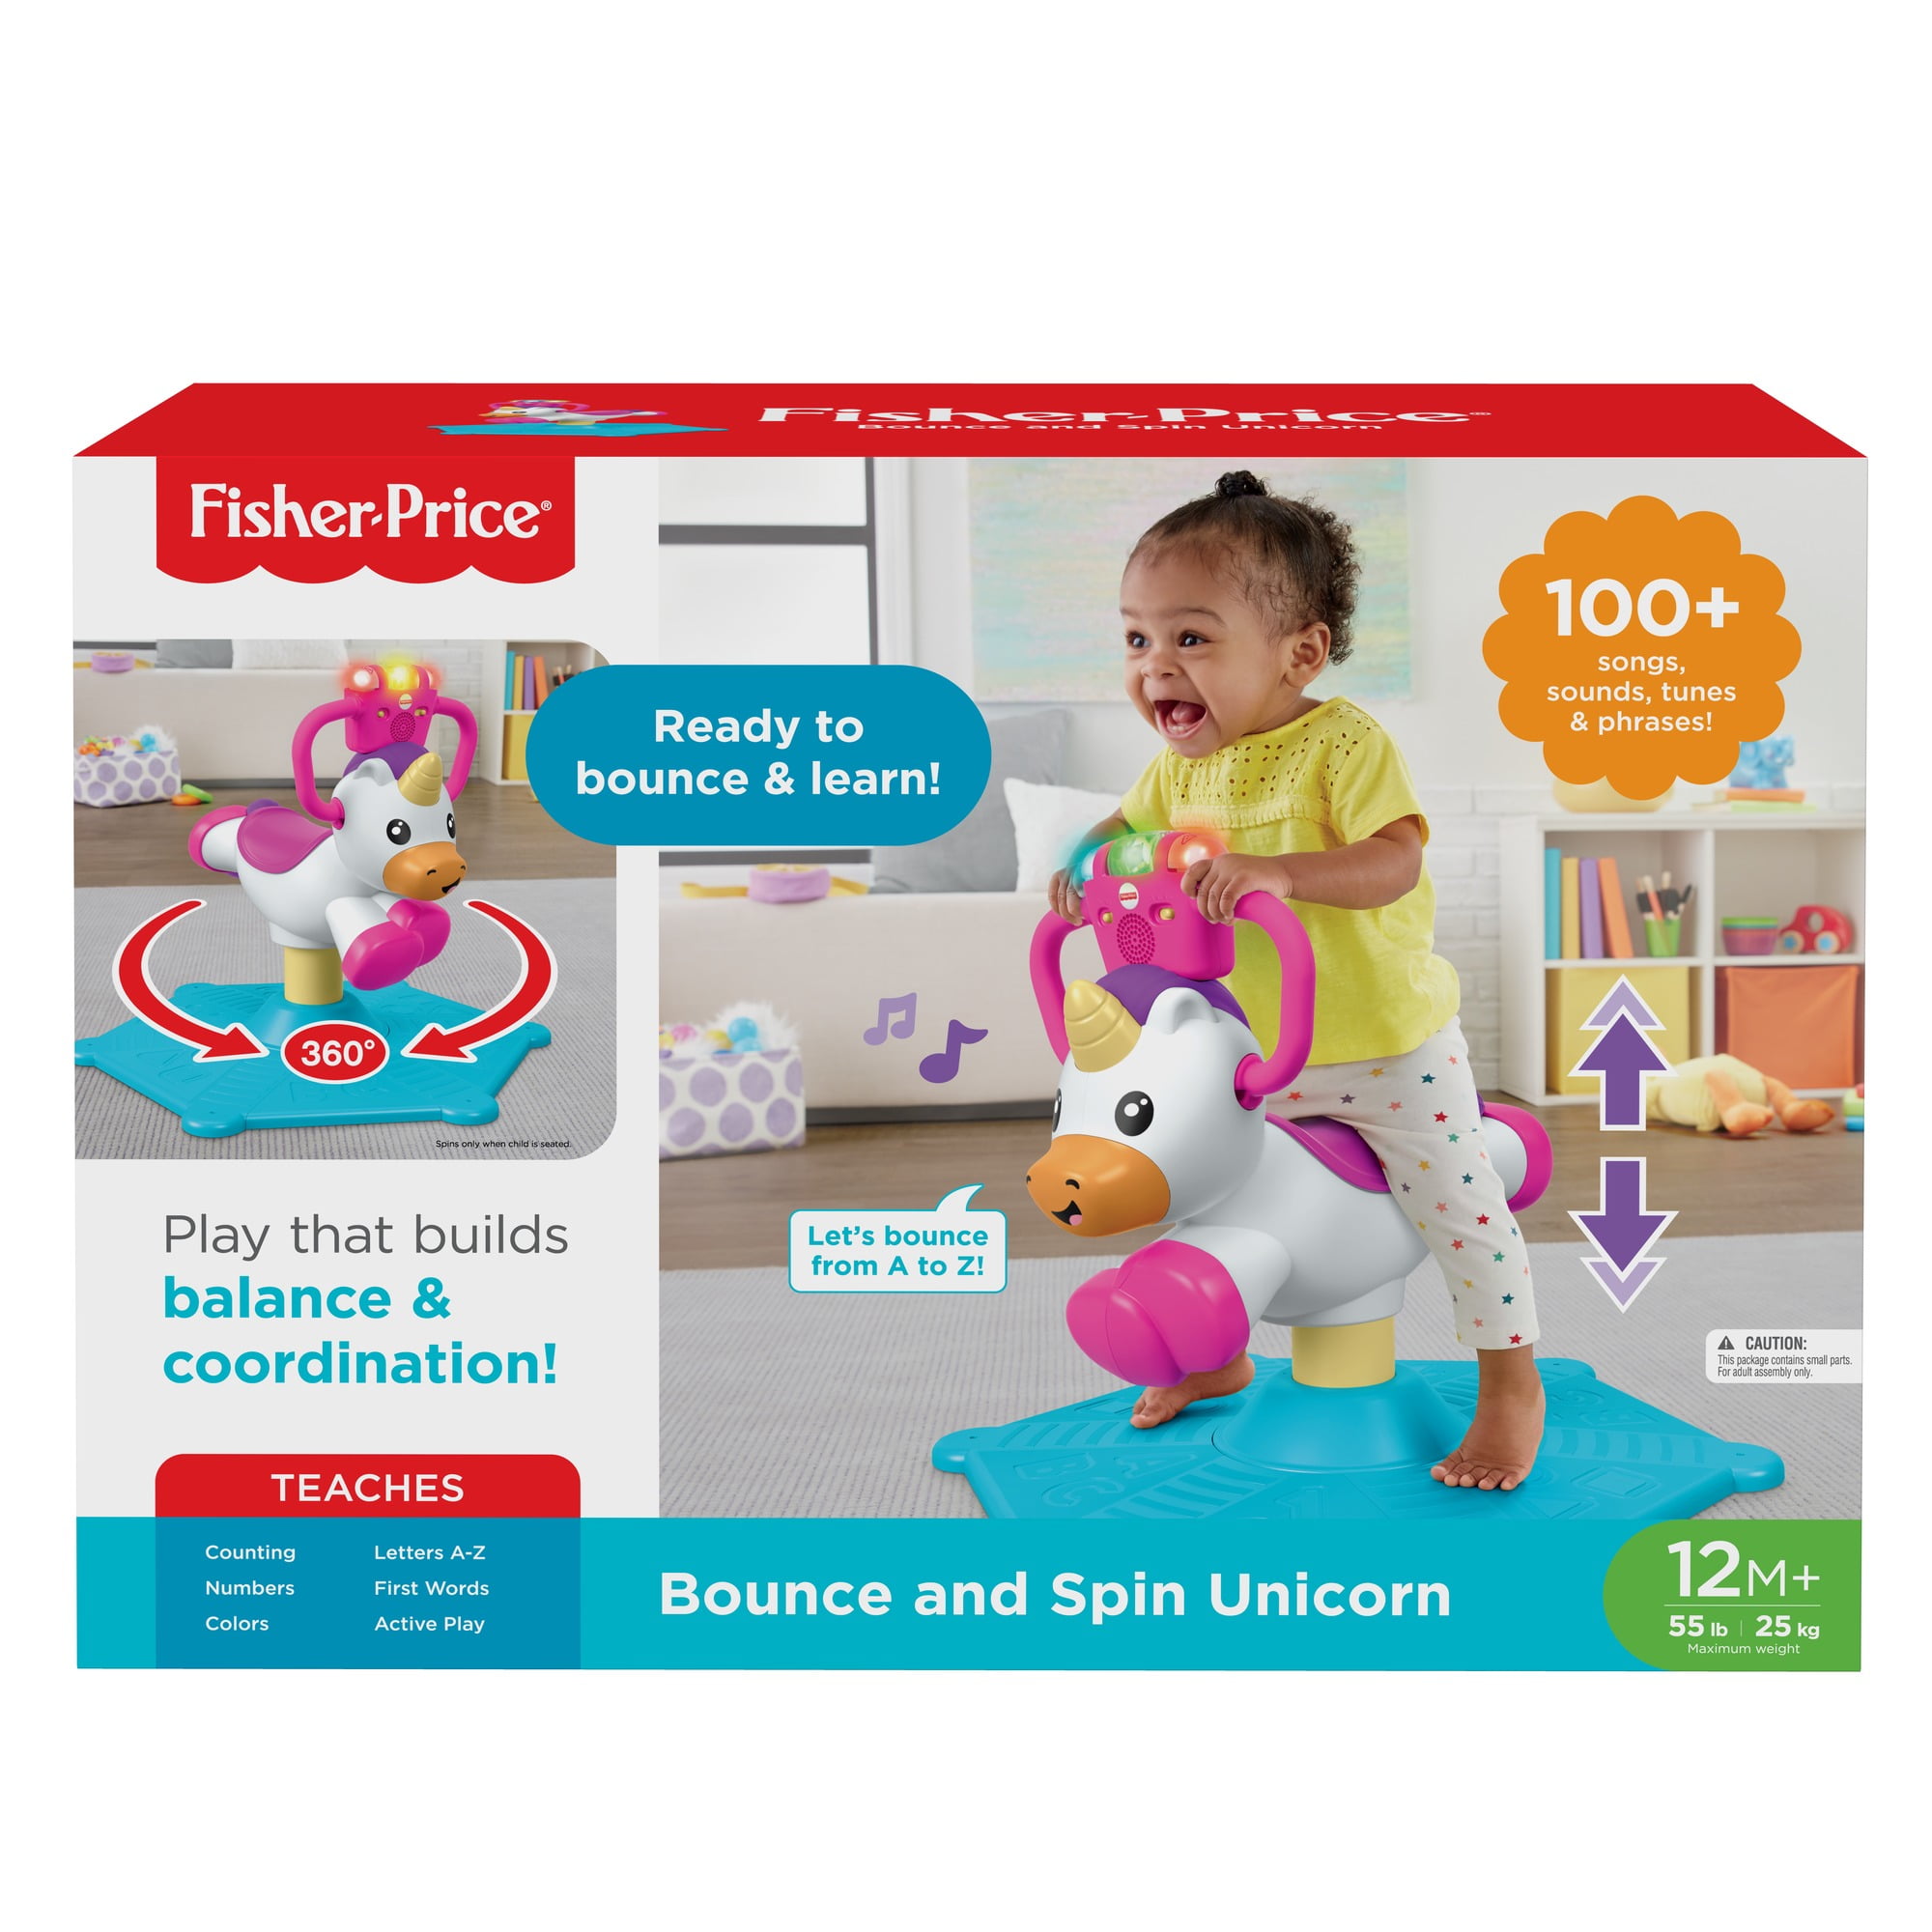 fisher price spin and play